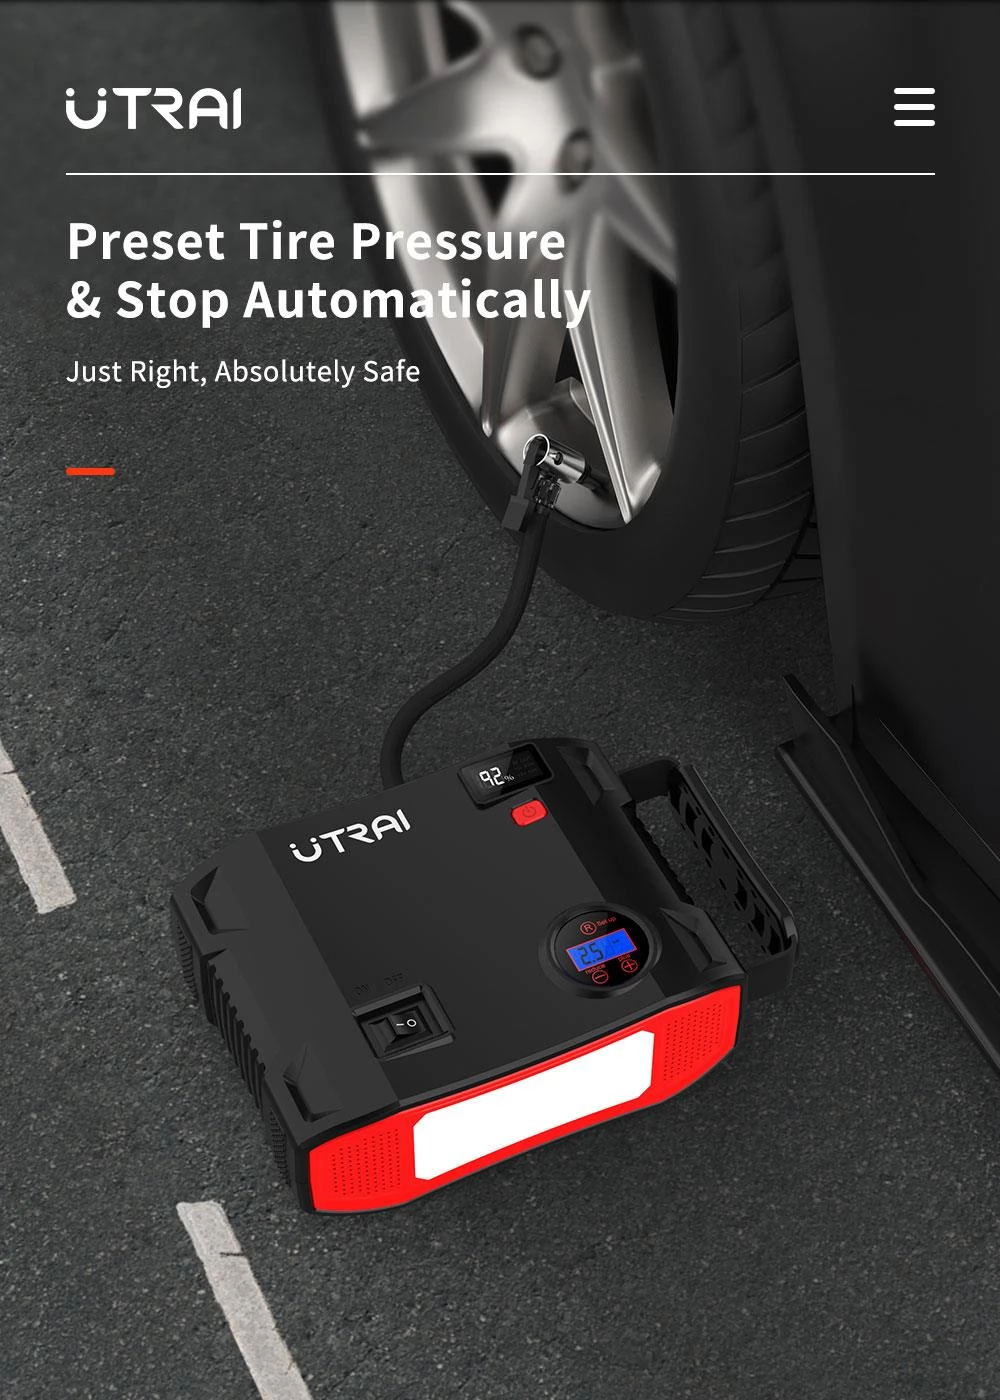 UTRAI Jstar 5 24000mAh 2000A 4-in-1 Car Jump Starter with 150 PSI Air Compressor Dual Display Start Up To 8.0 L GAS 7.5 L DIESEL